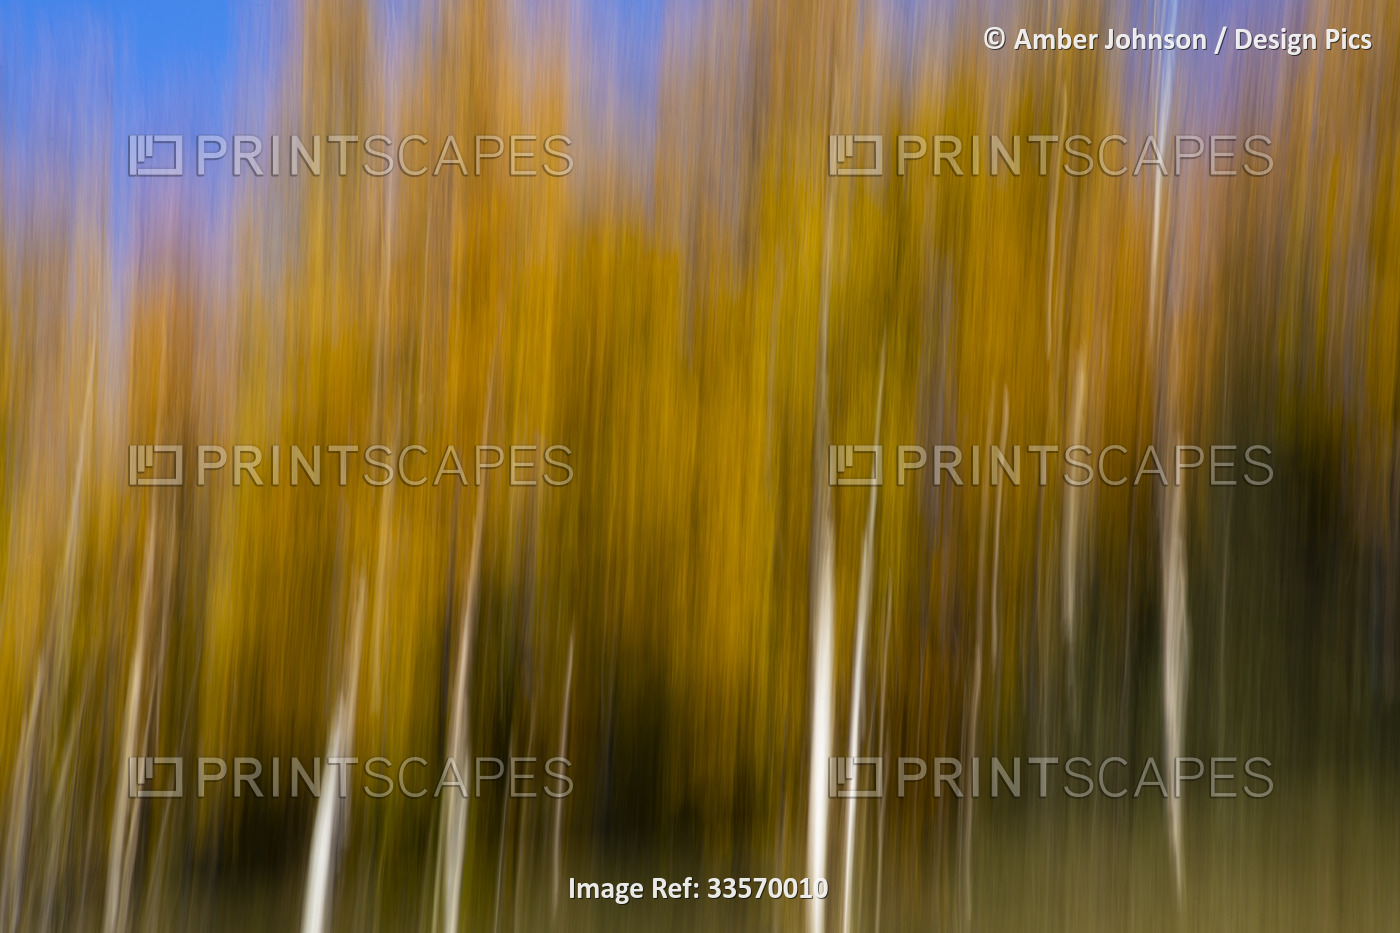 Aspen/birch trees with fall colors displayed on a long exposure create an ...